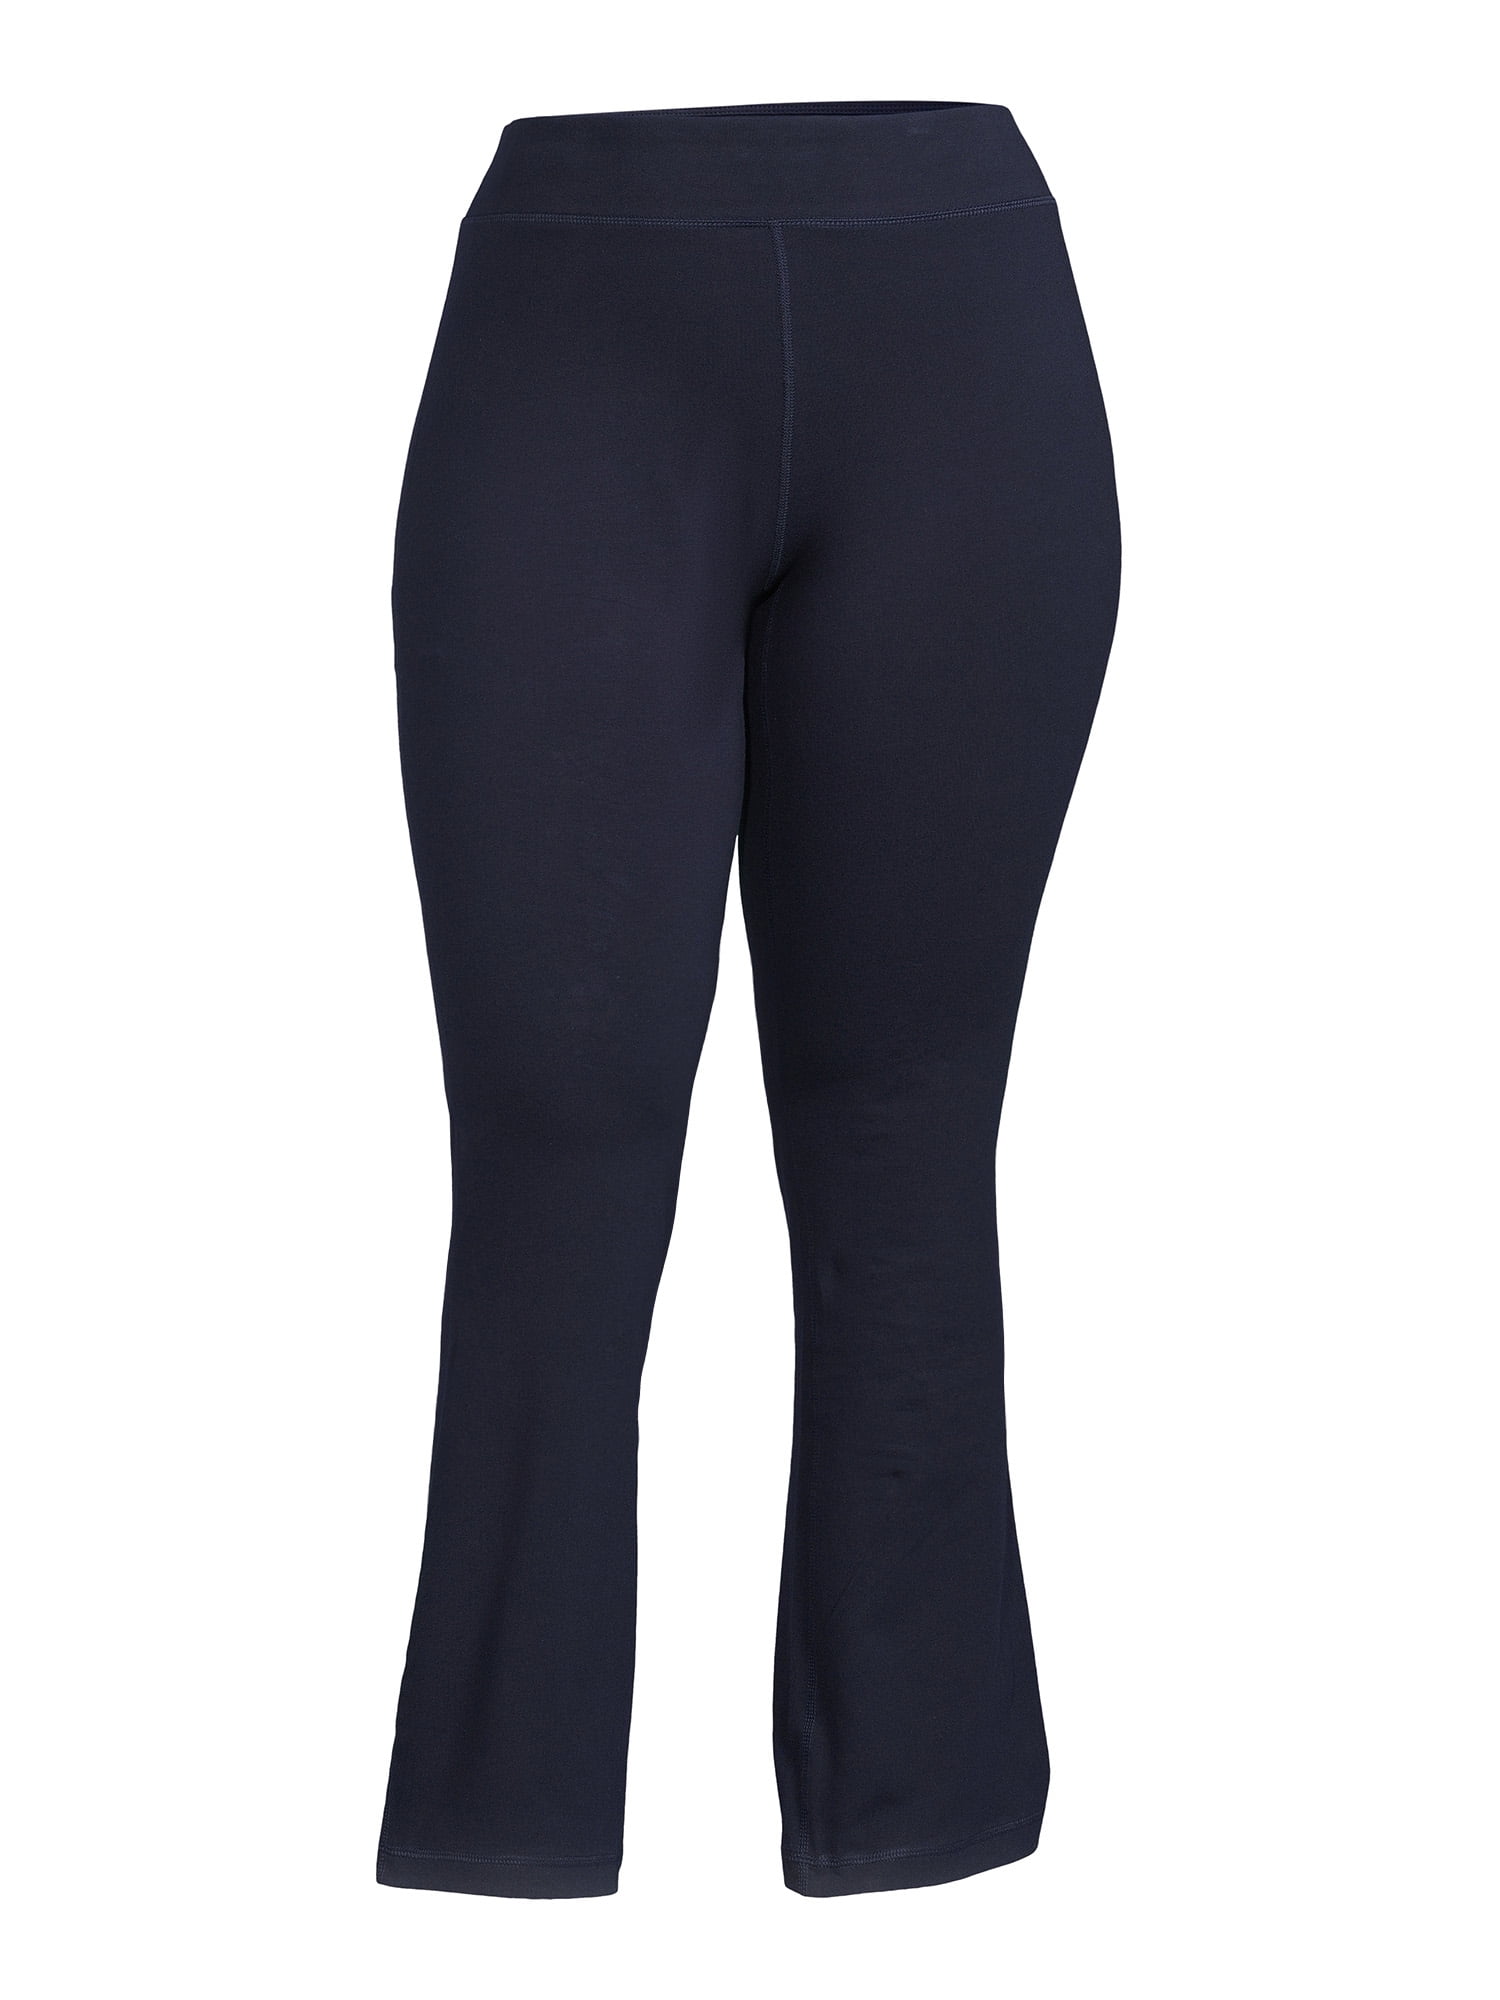 Women's Cotton Spandex Fitness Pant – The Spinsterz